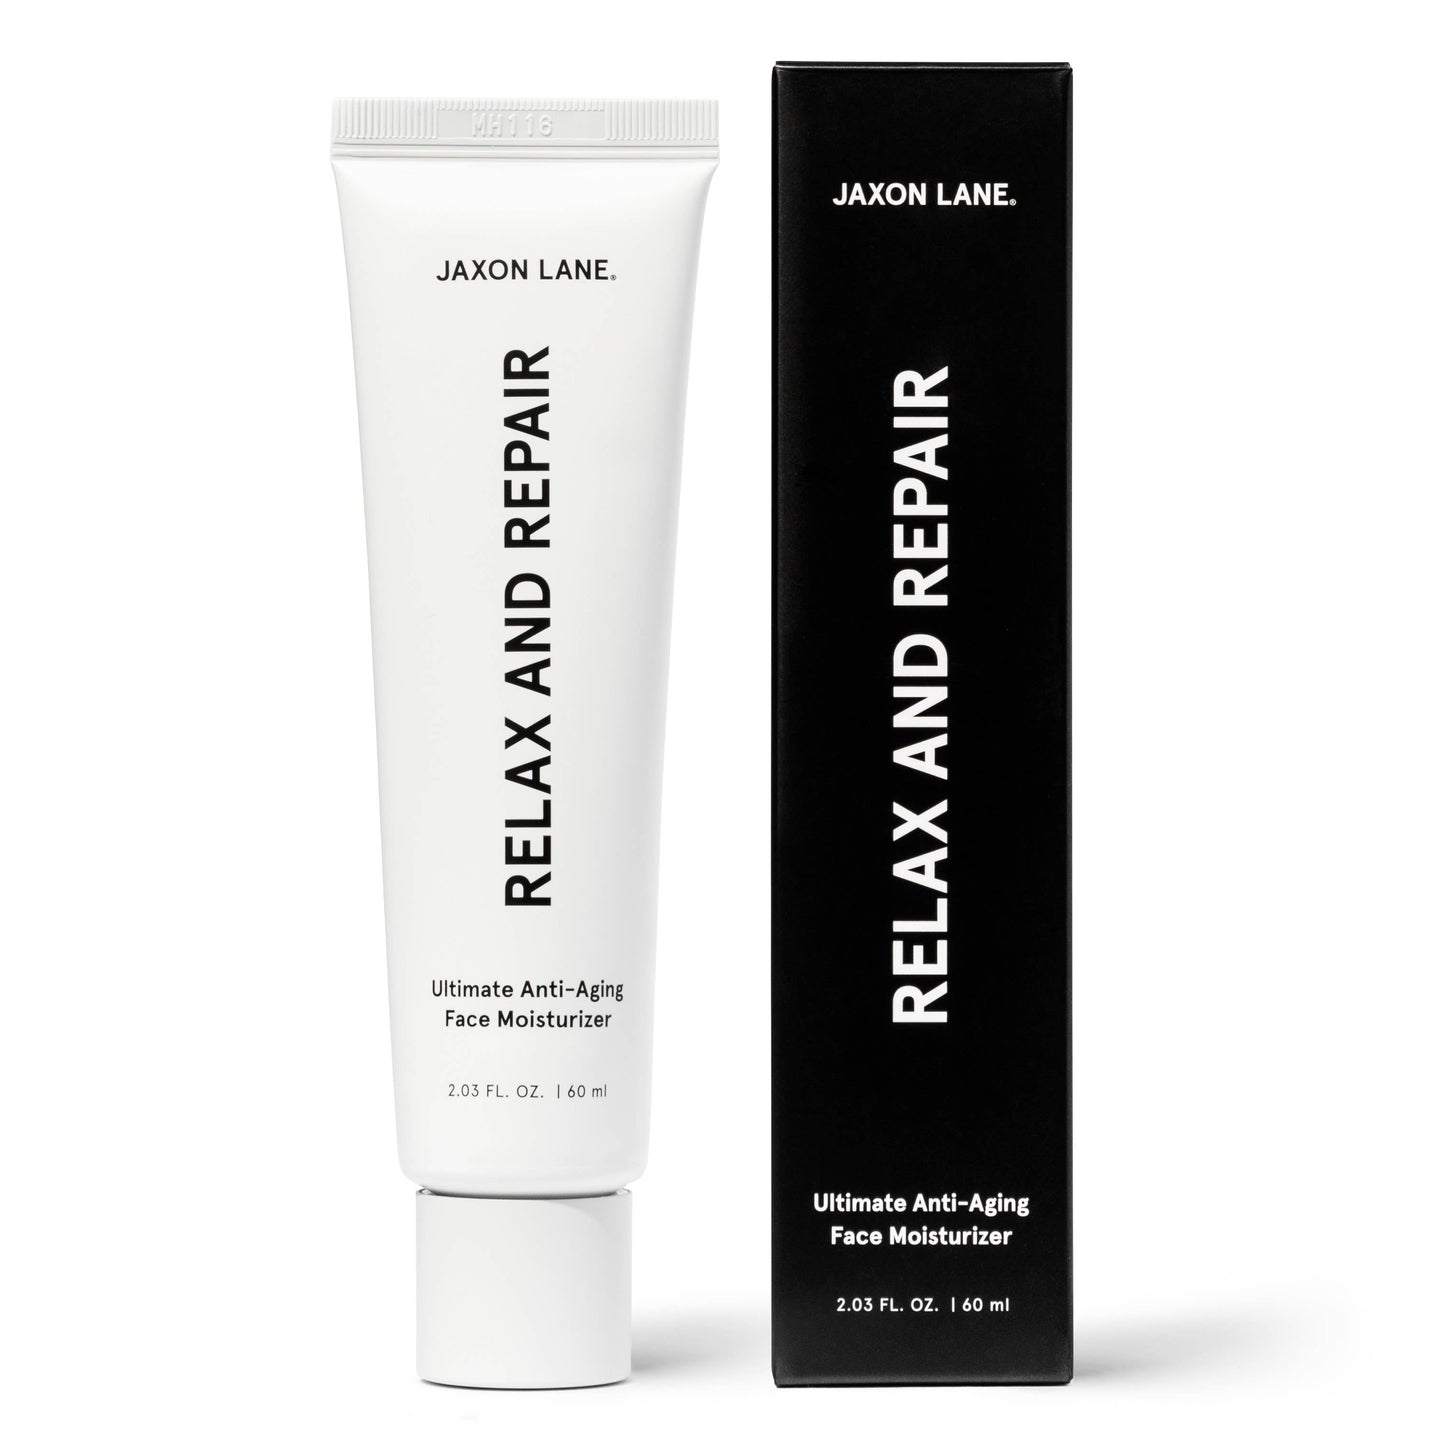 RELAX AND REPAIR - Ultimate Anti-Aging Face Moisturizer